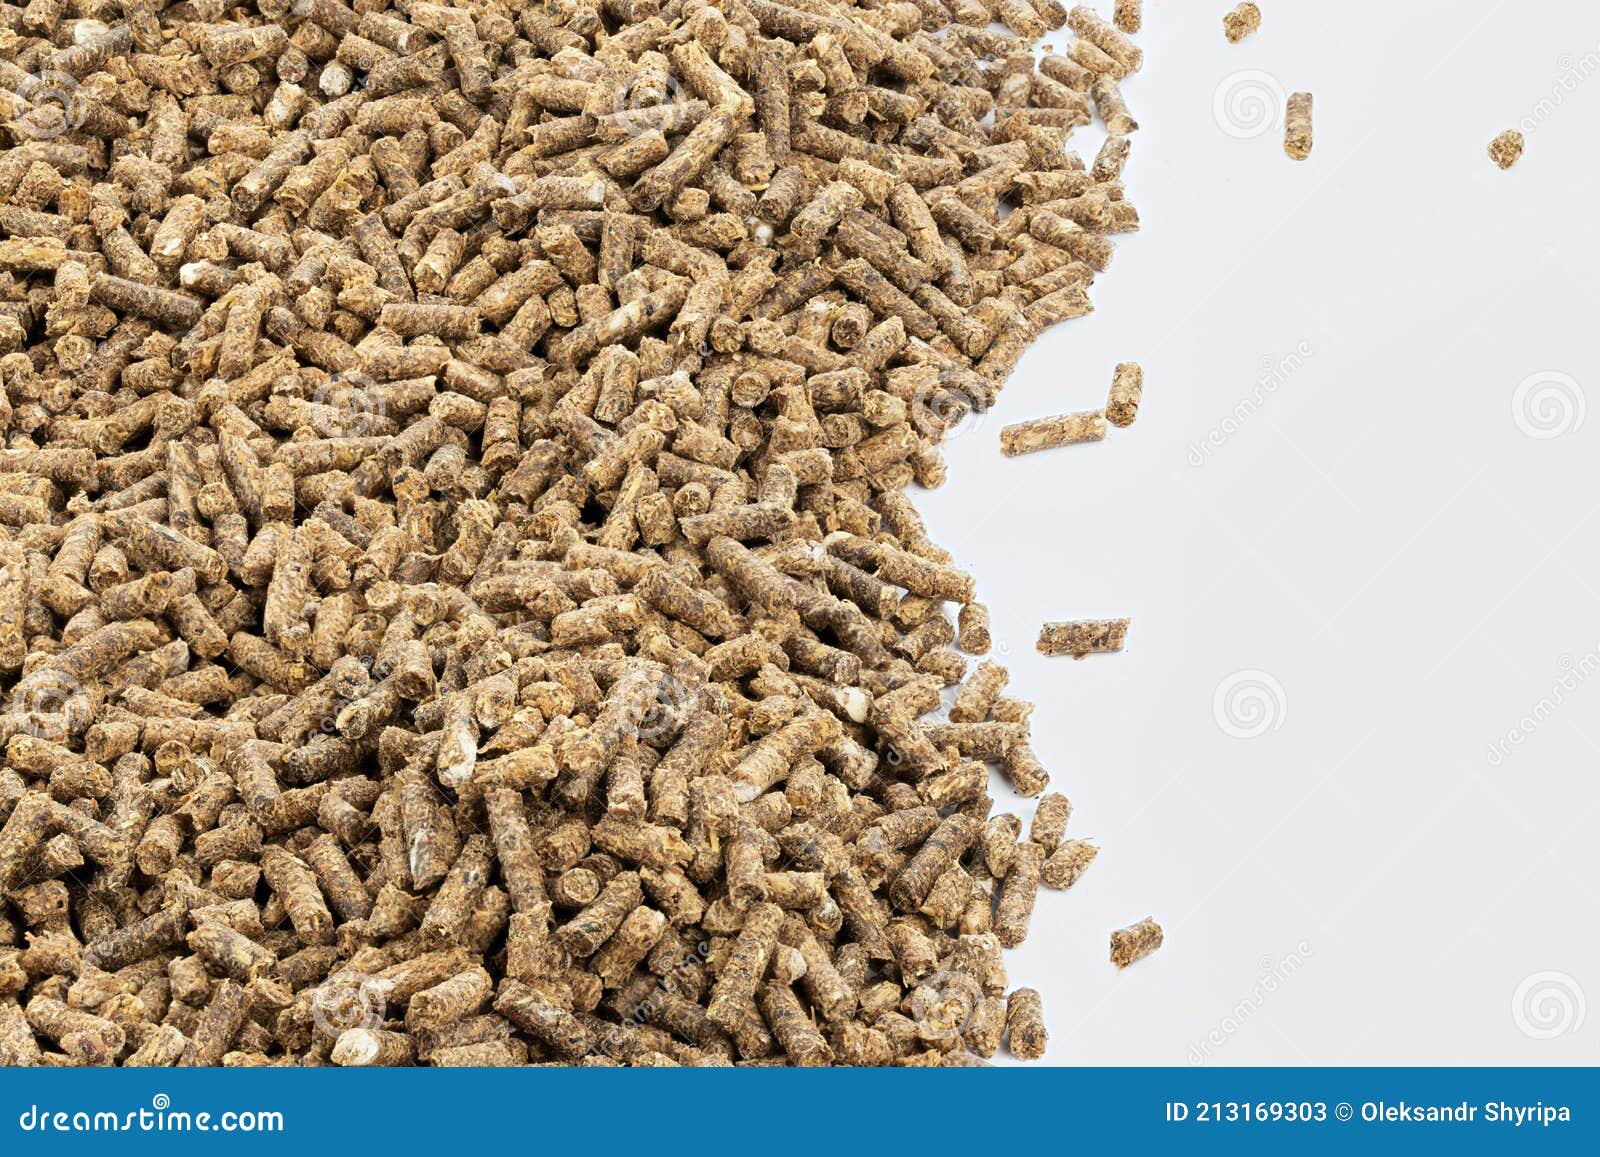 feed for livestock. pig feed pellets,feed  for hamster, rabbits or mouse on a white background